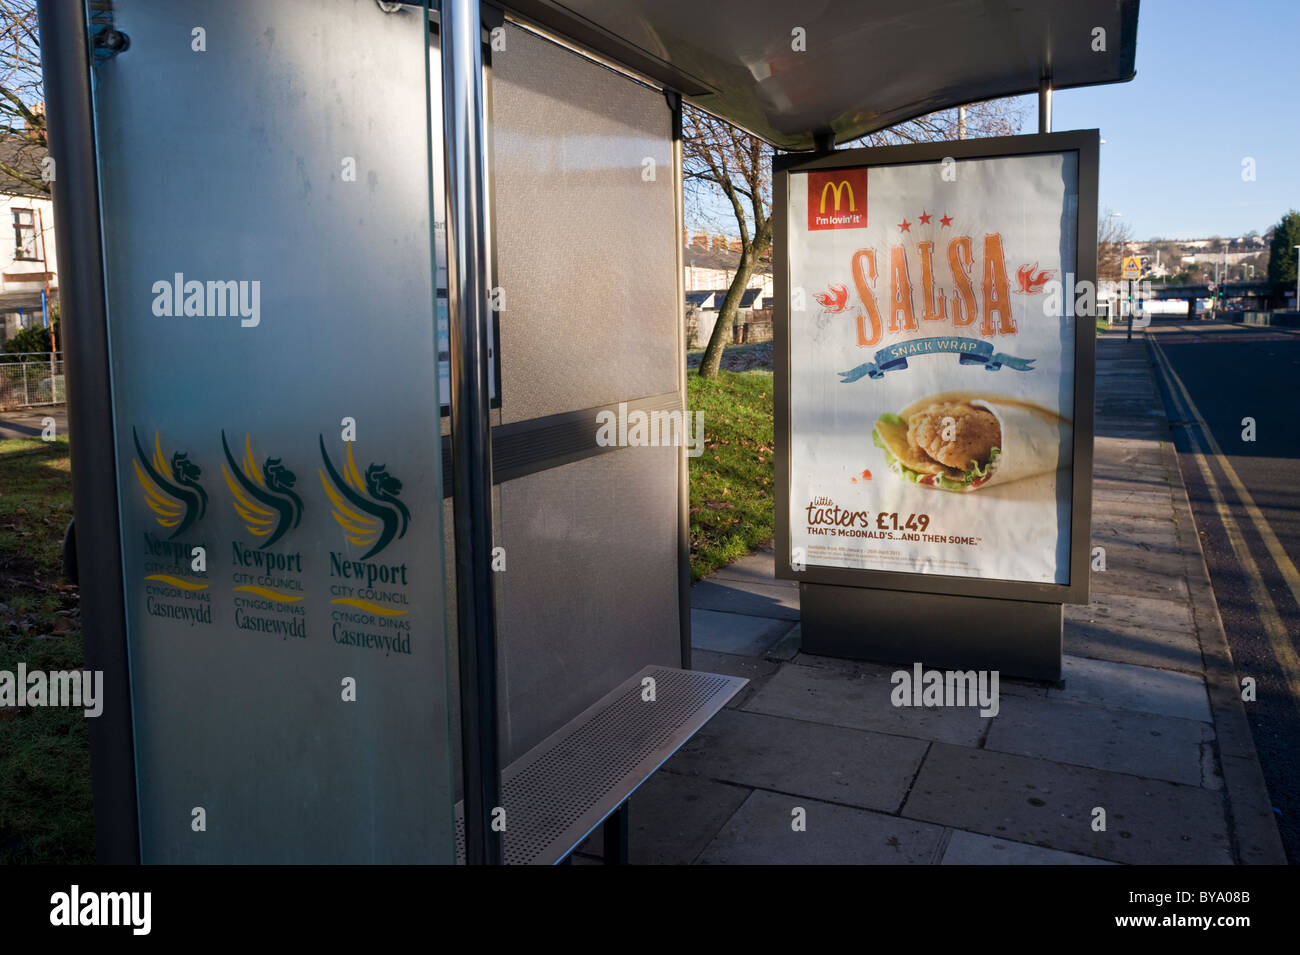 JCDecaux affissioni per MacDonalds Salsa snack wrap sul bus shelter in Newport South Wales UK Foto Stock